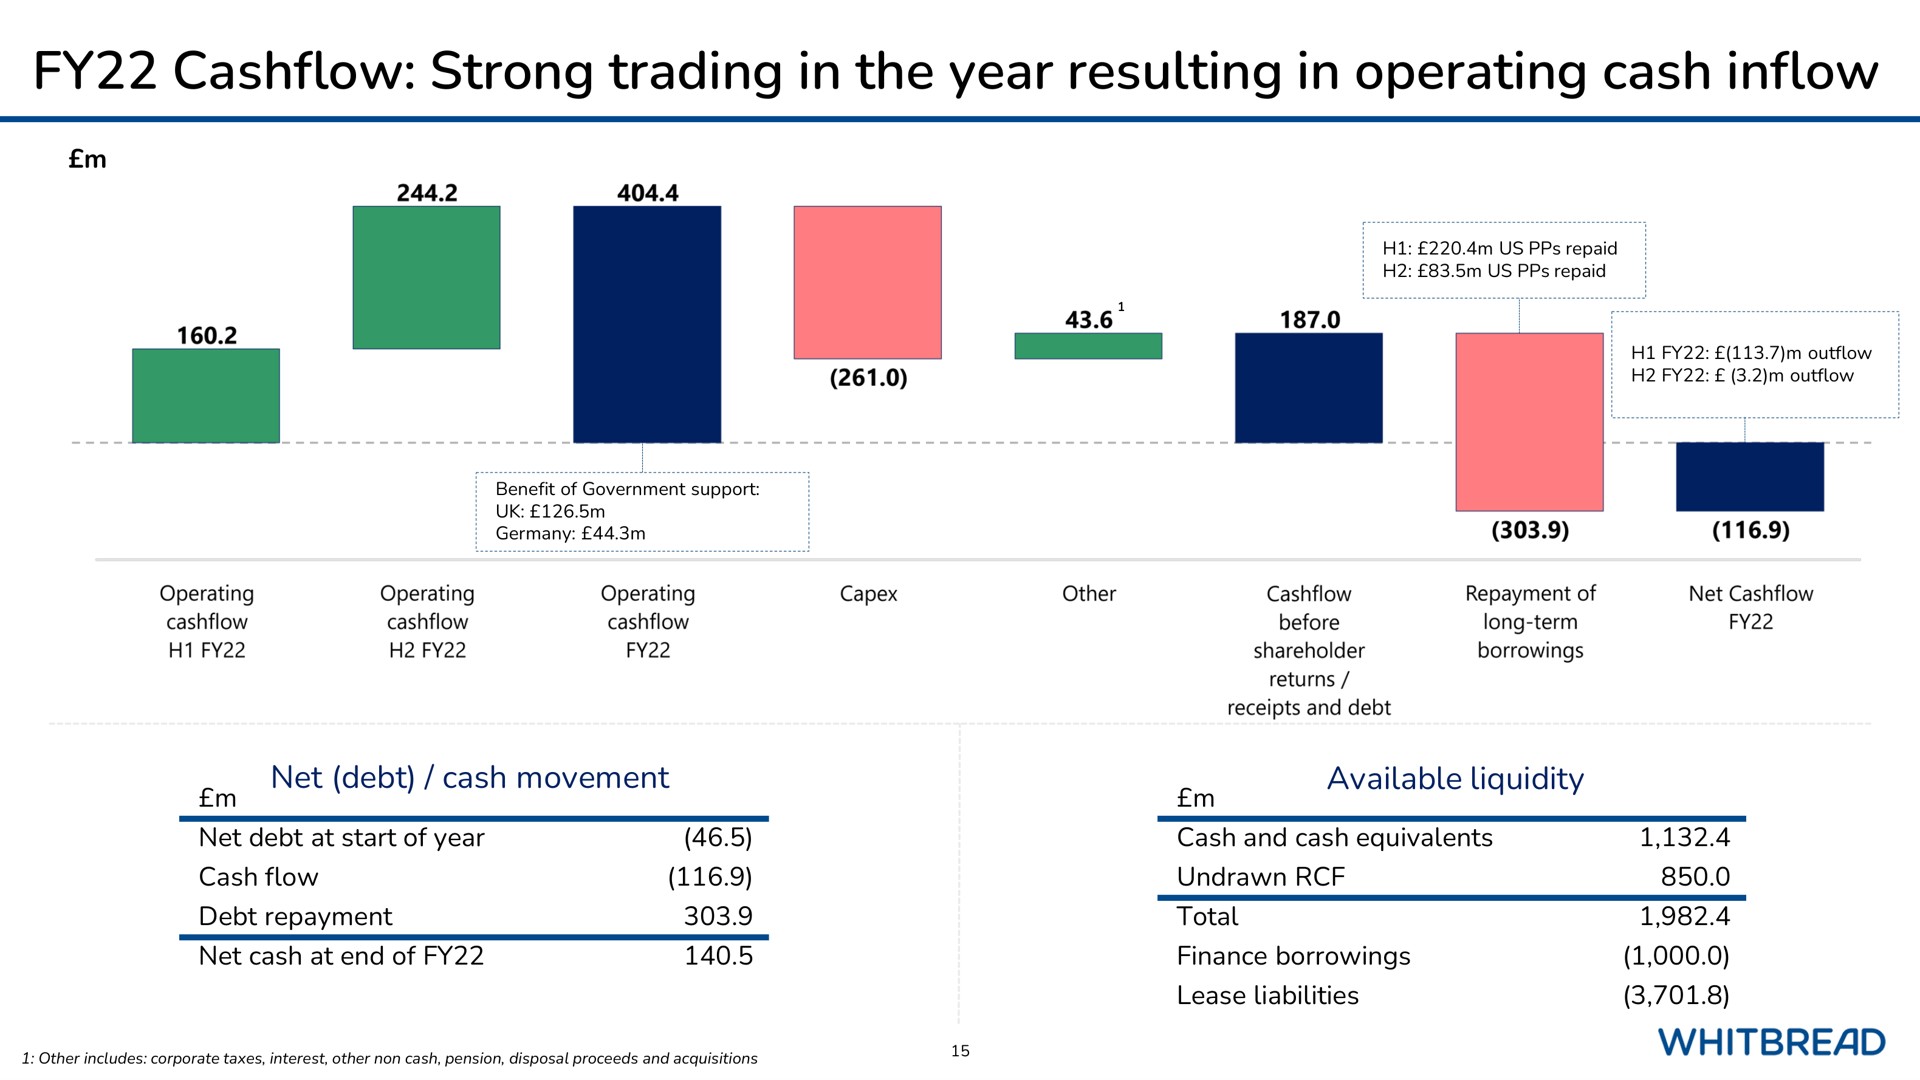 strong trading in the year resulting in operating cash inflow | Whitebread